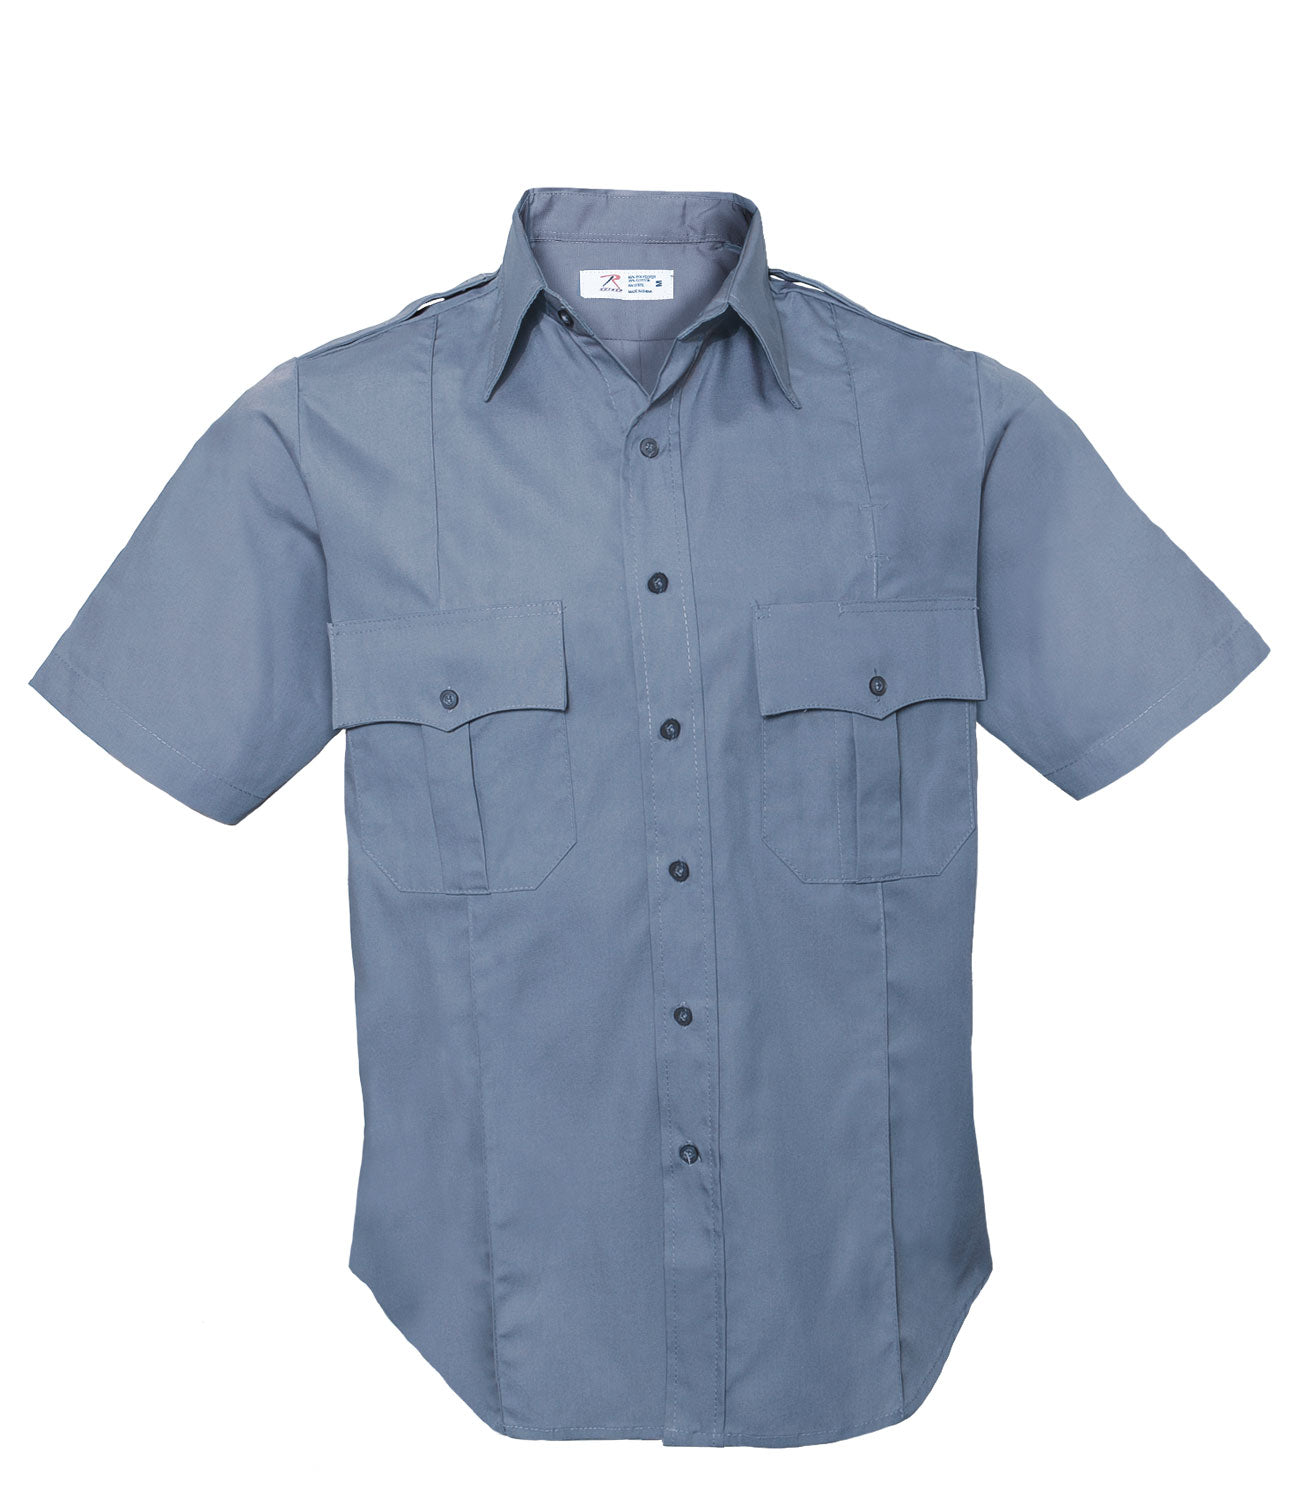 [Public Safety] Poly/Combed Cotton Poplin Weave Police & Security Short-Sleeve Uniform Shirts Light Blue